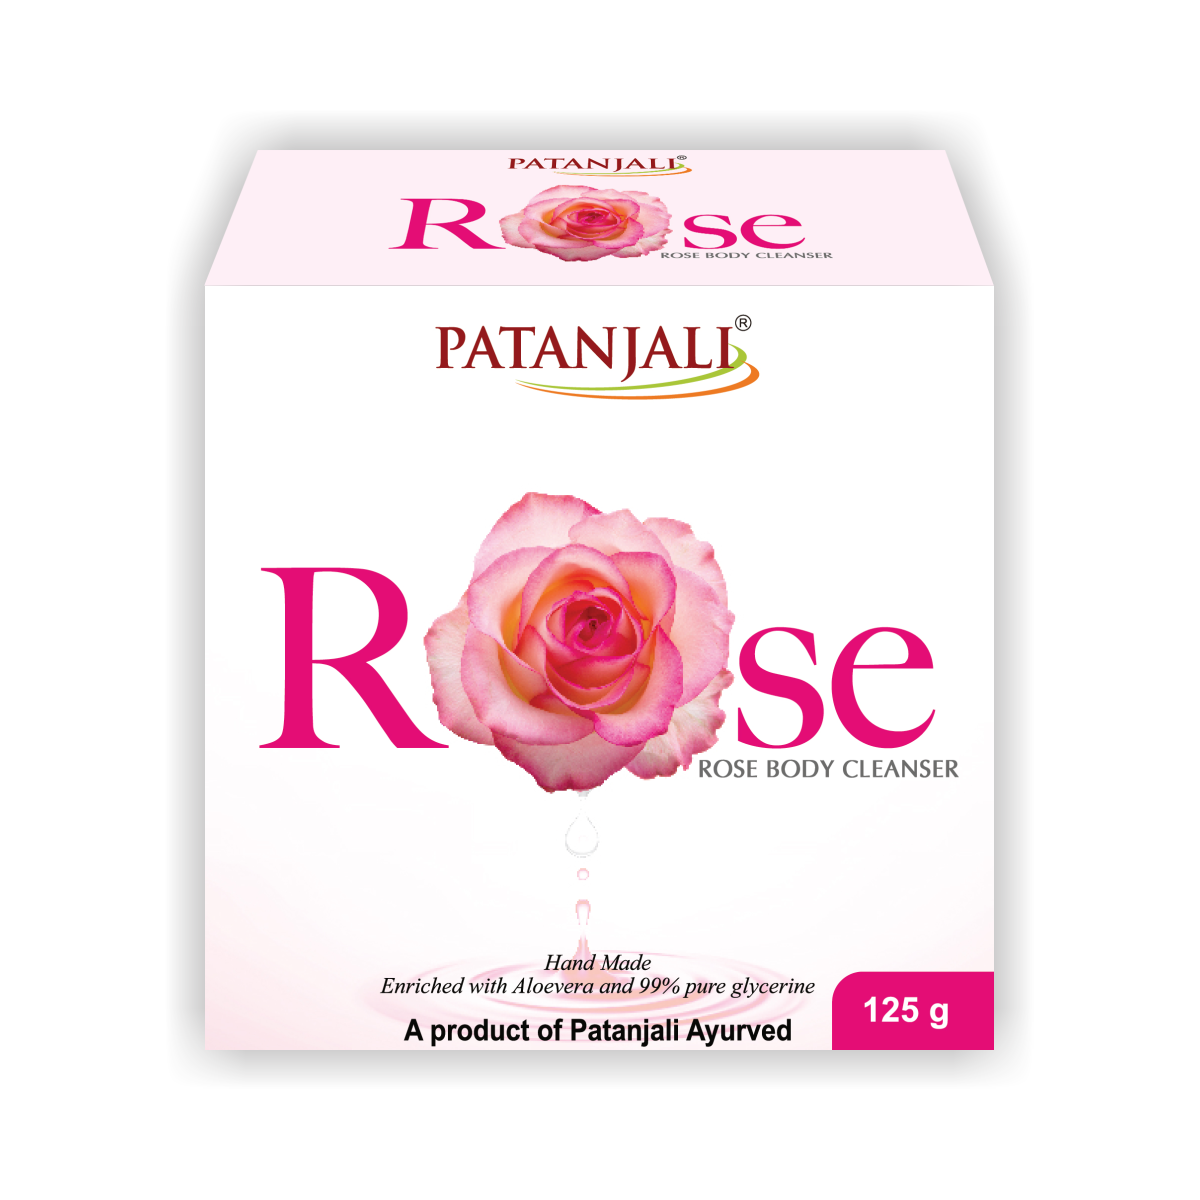 Patanjali Rose Body Cleanser